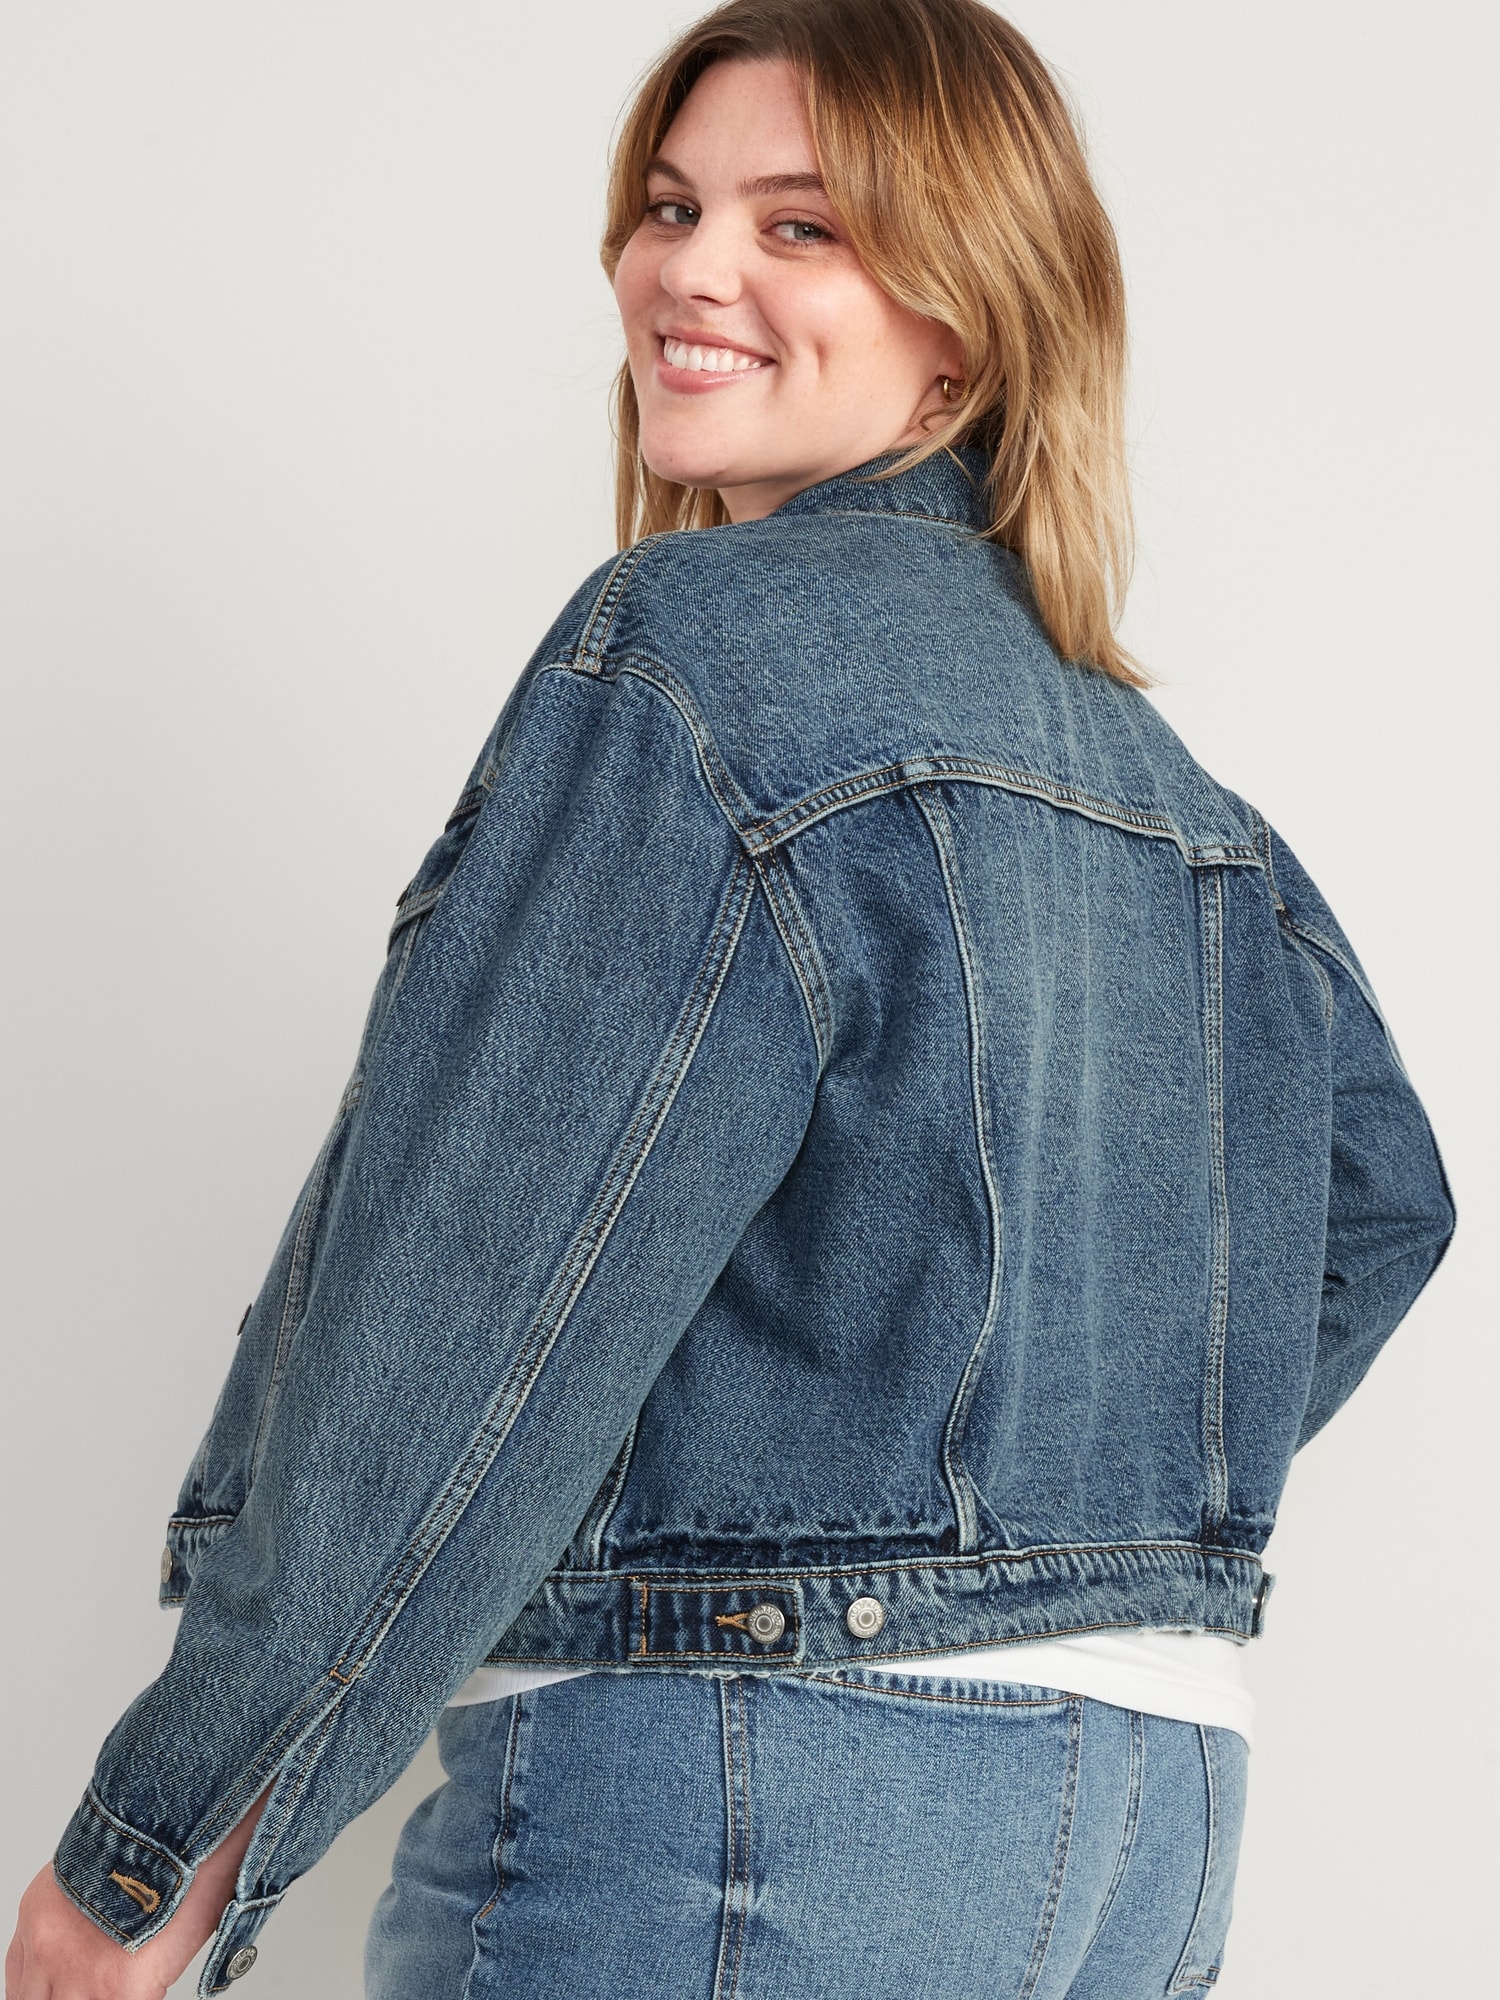 Cropped Light-Wash Workwear Jean Jacket for Women | Old Navy